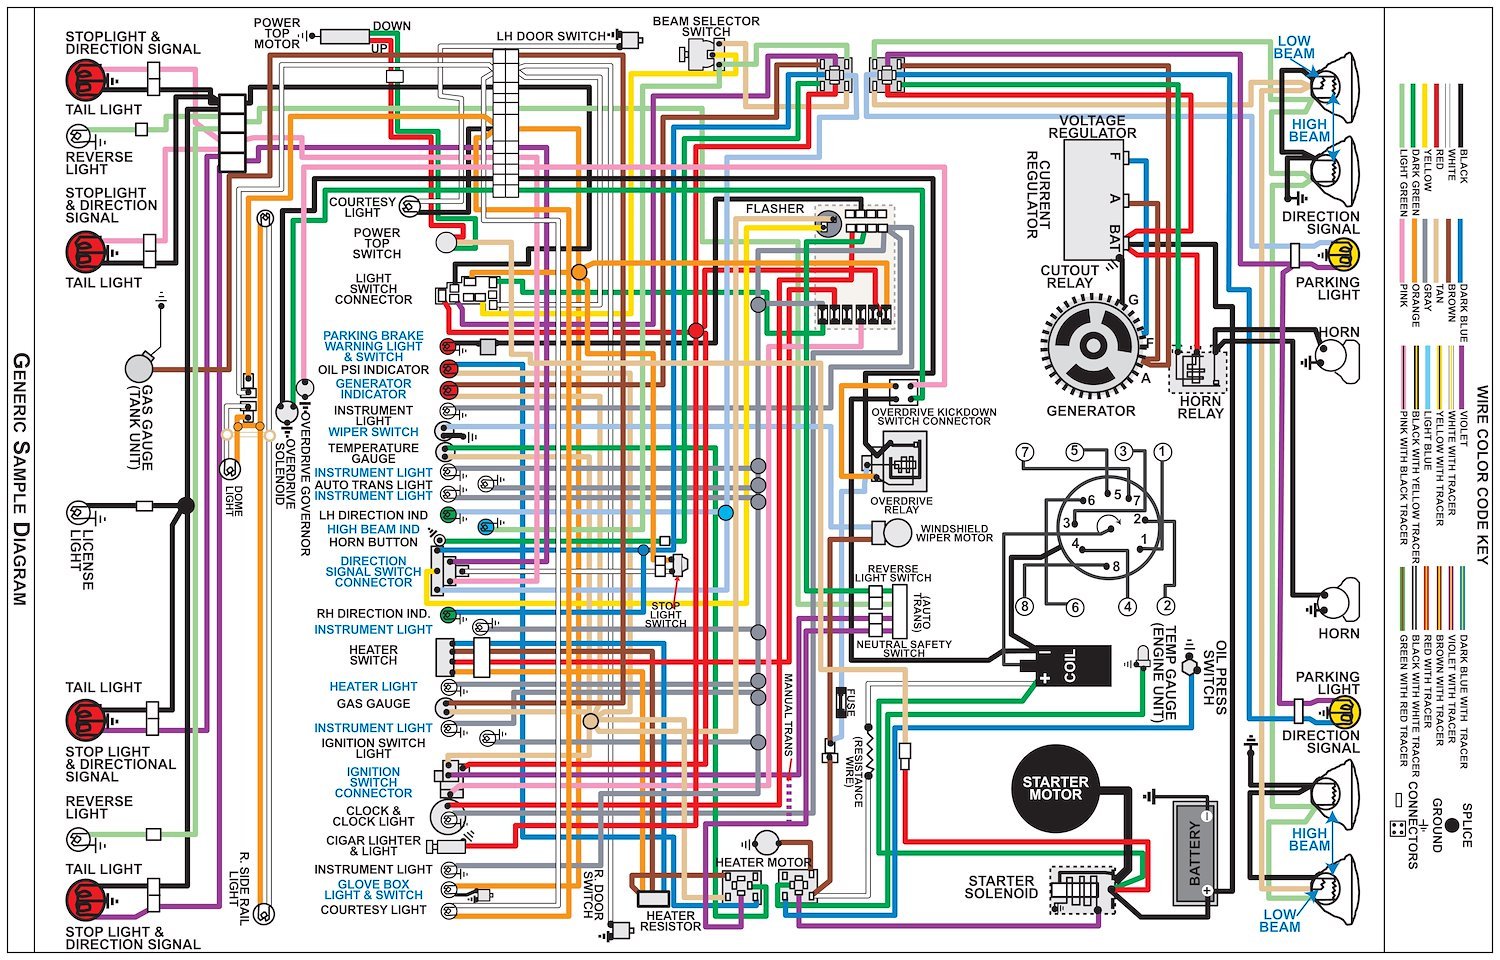 Wiring Diagram for 1965 Ford Galaxie, 11 in x 17 in., Laminated